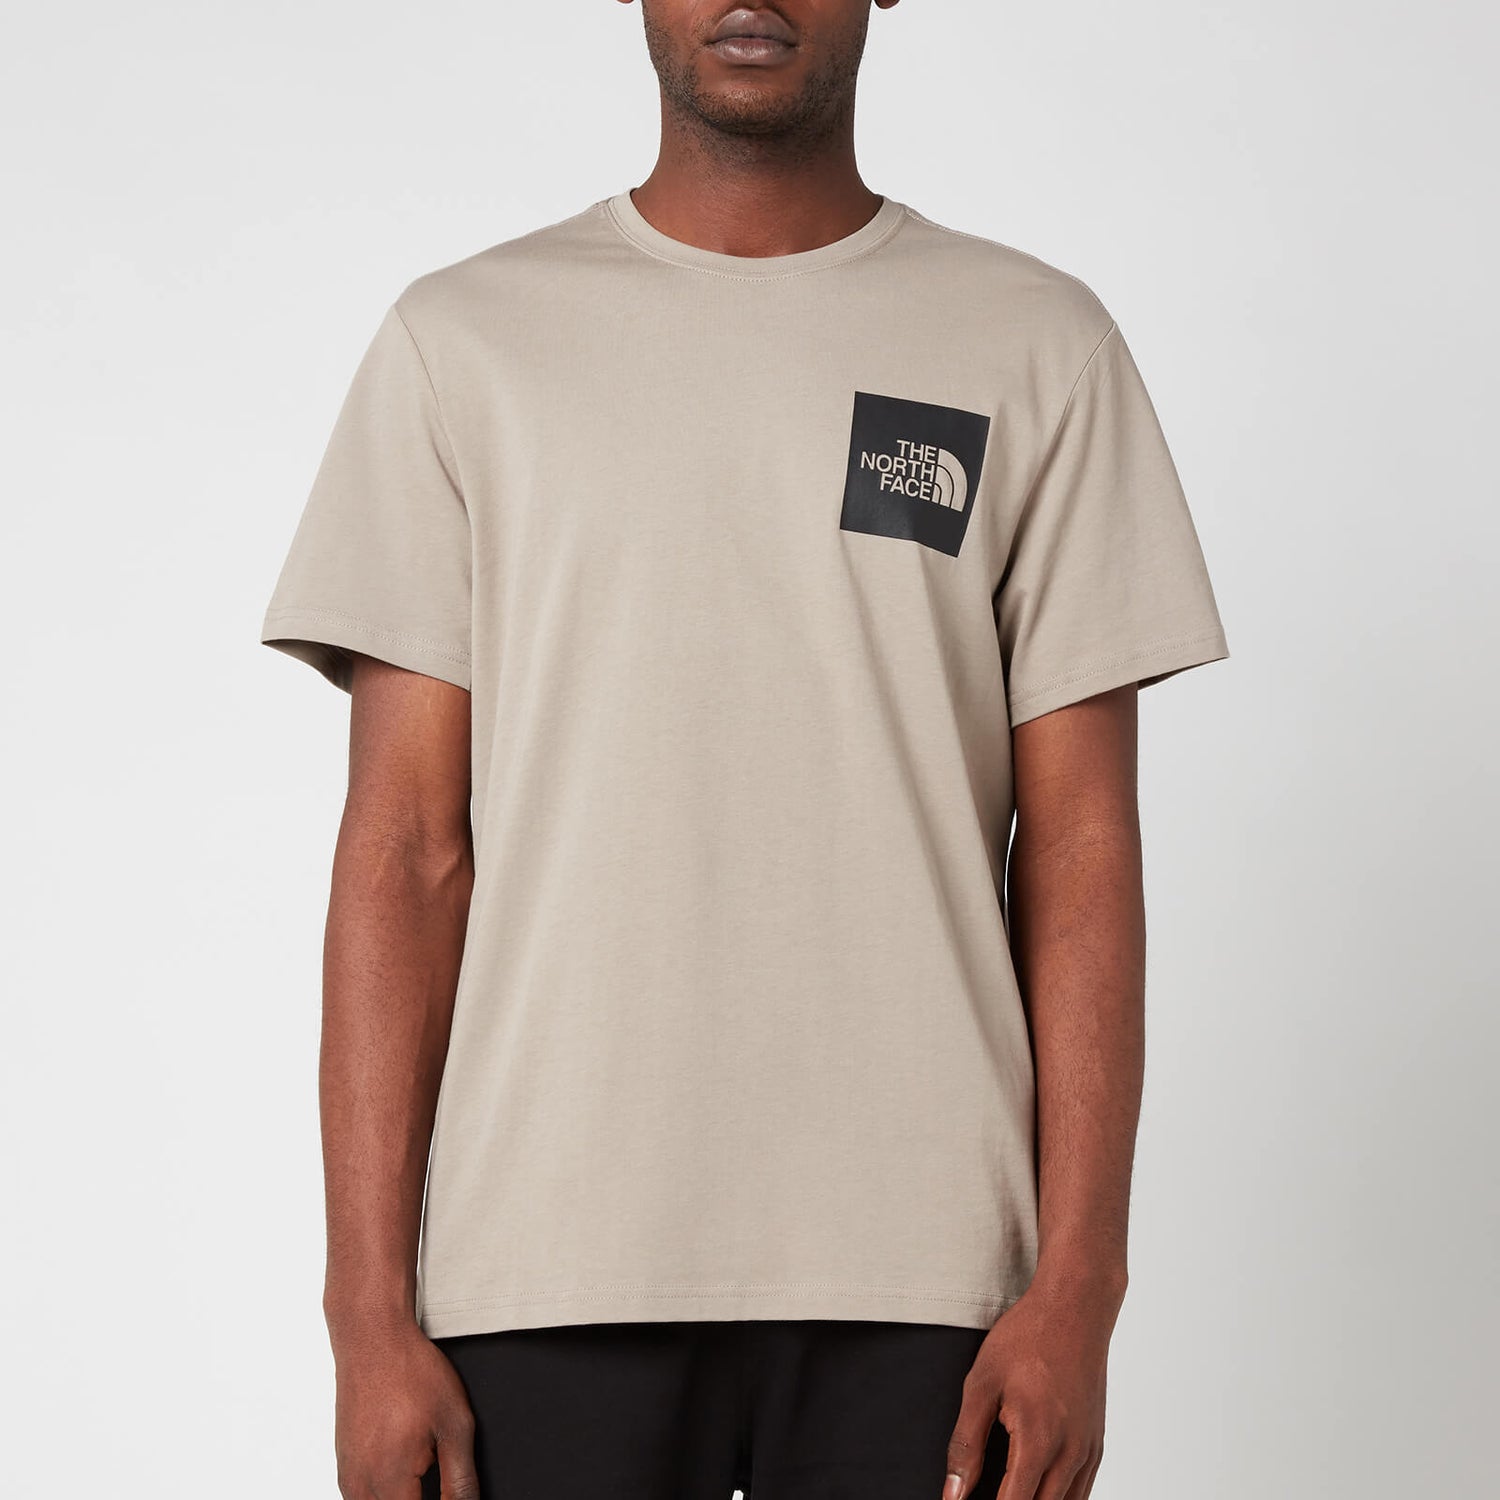 The North Face Men's Fine Short Sleeve T-Shirt - Mineral Grey